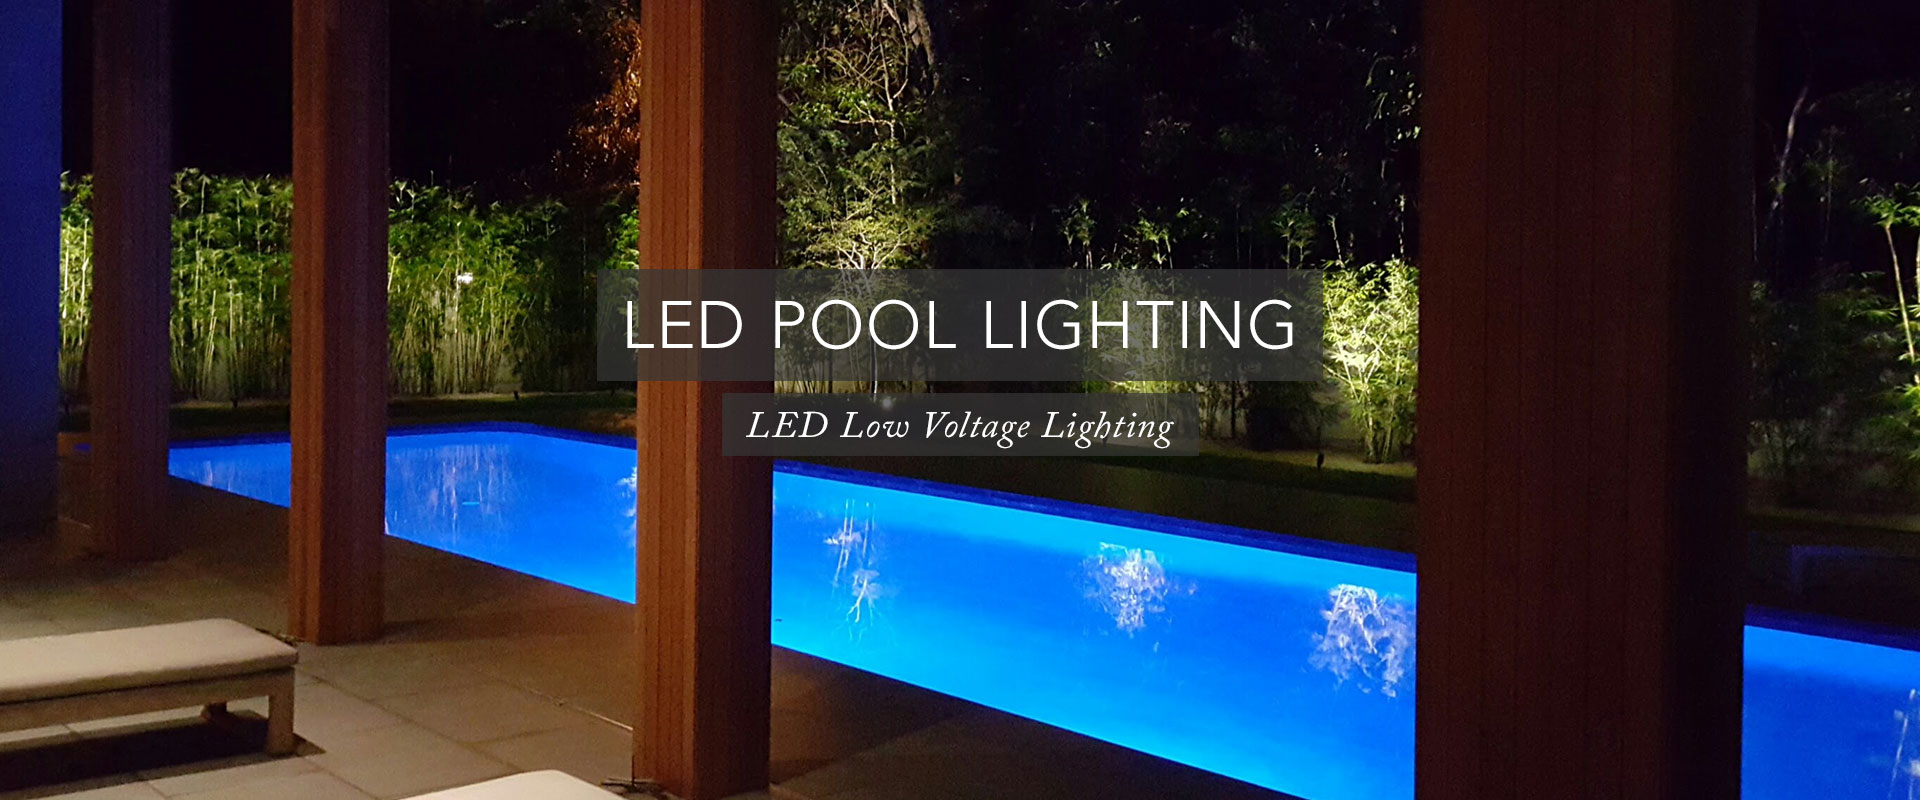 lighting landscape miami led outdoor installations specialists pool